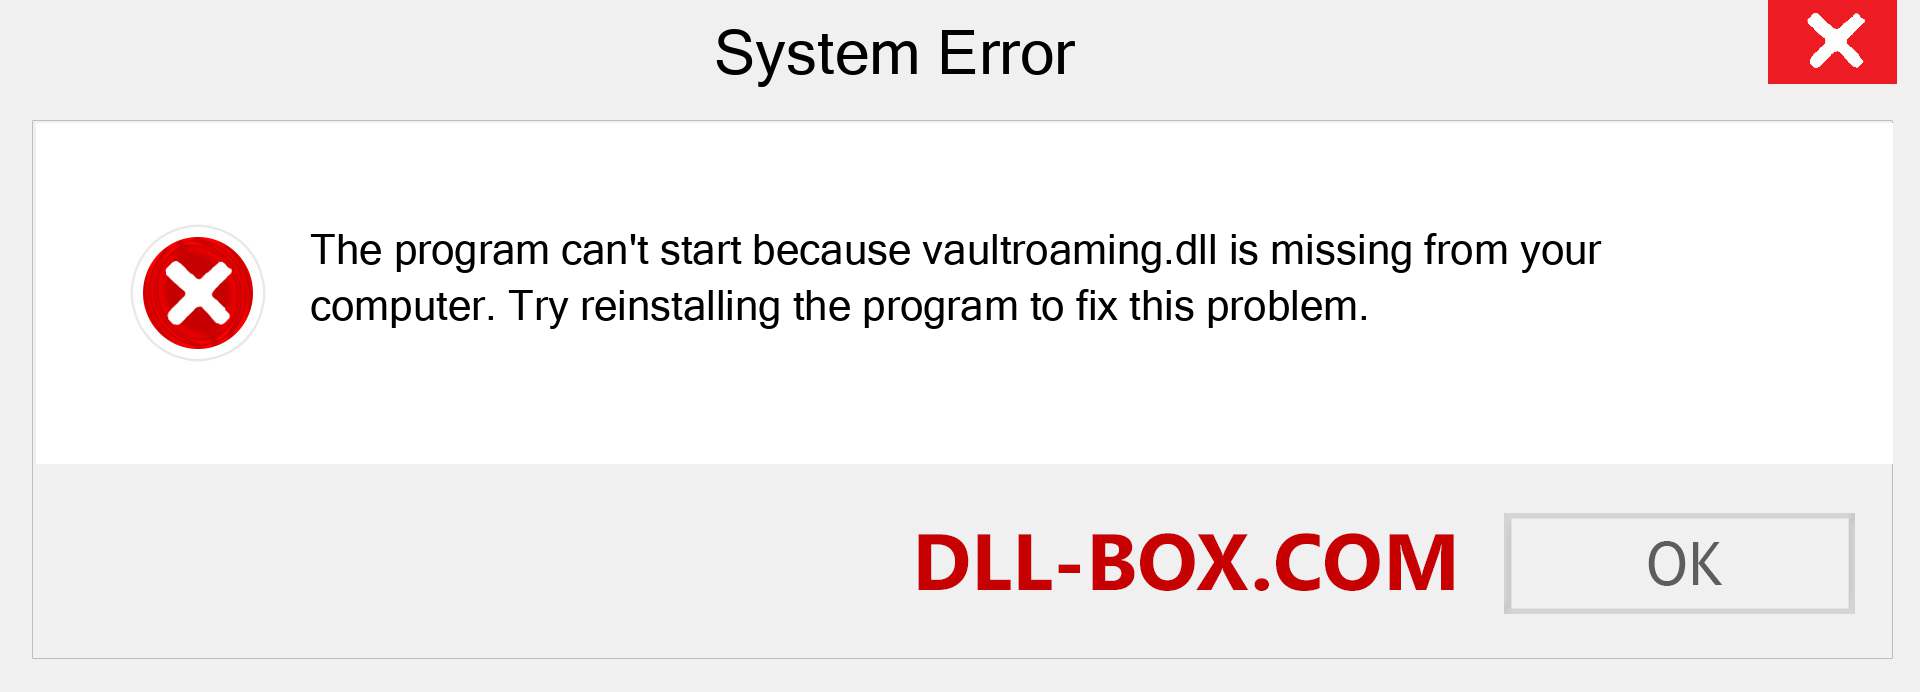  vaultroaming.dll file is missing?. Download for Windows 7, 8, 10 - Fix  vaultroaming dll Missing Error on Windows, photos, images